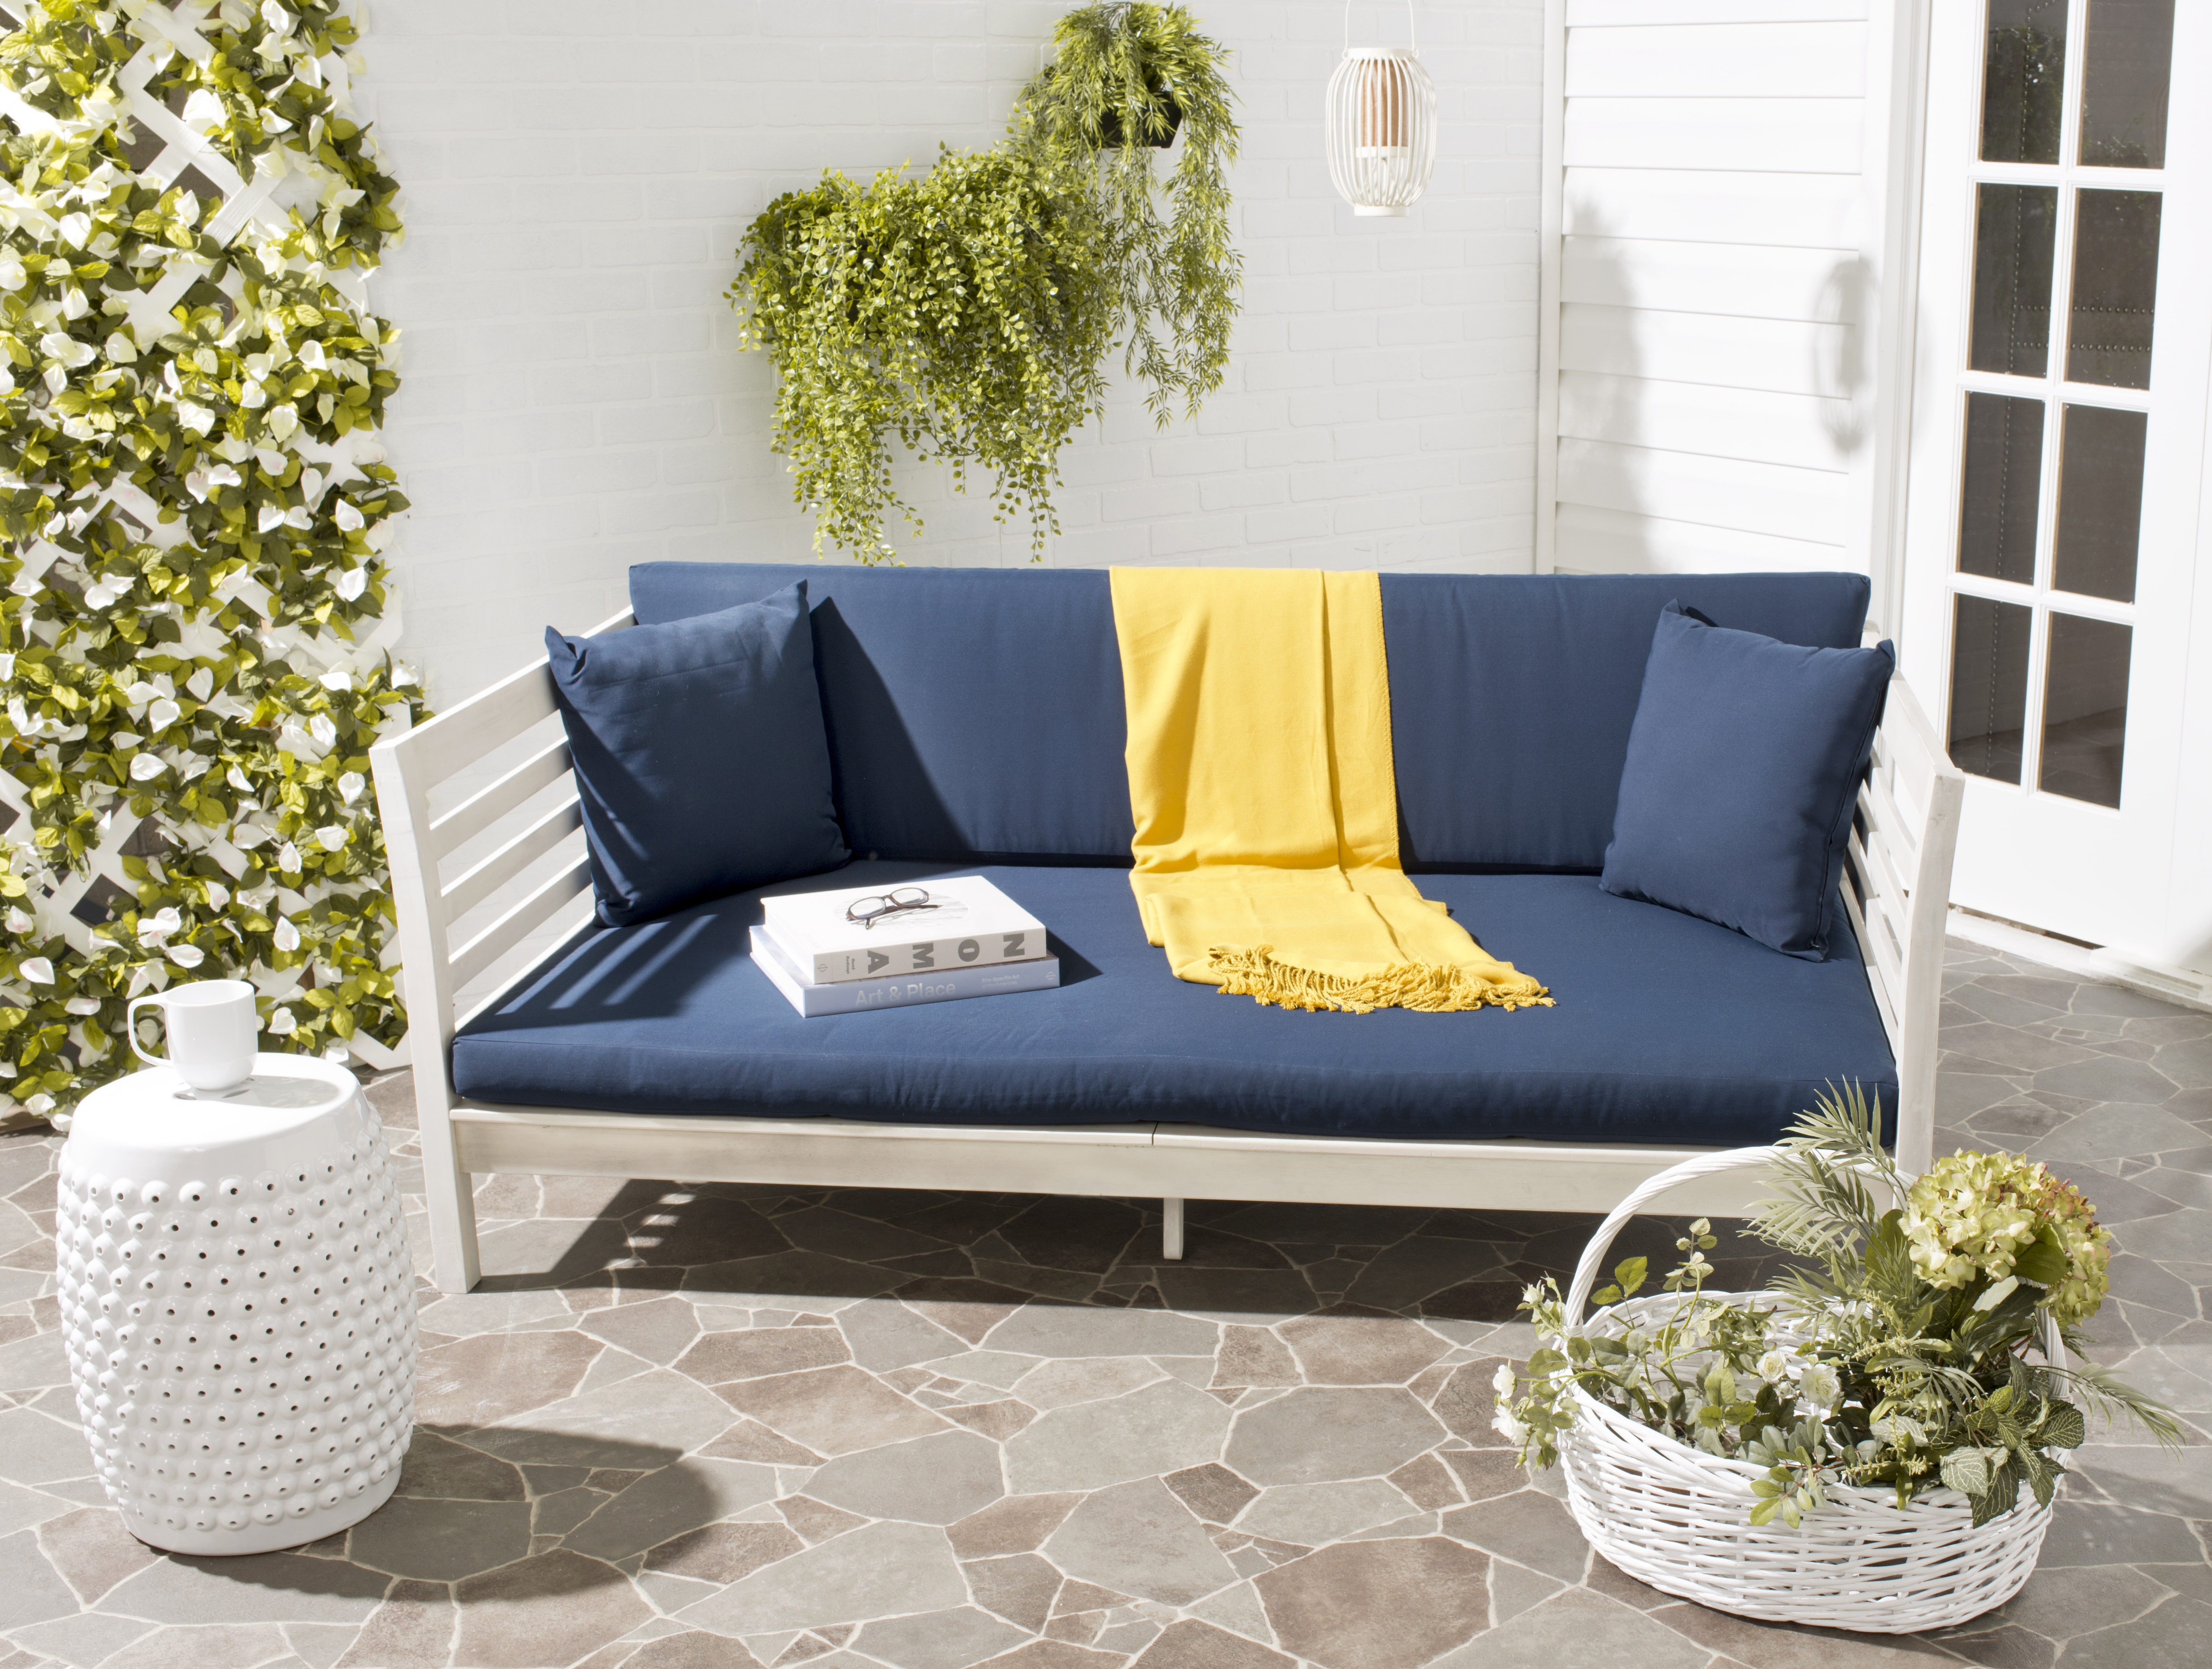 Malibu Daybed - Antique White/Navy - Arlo Home - Image 3